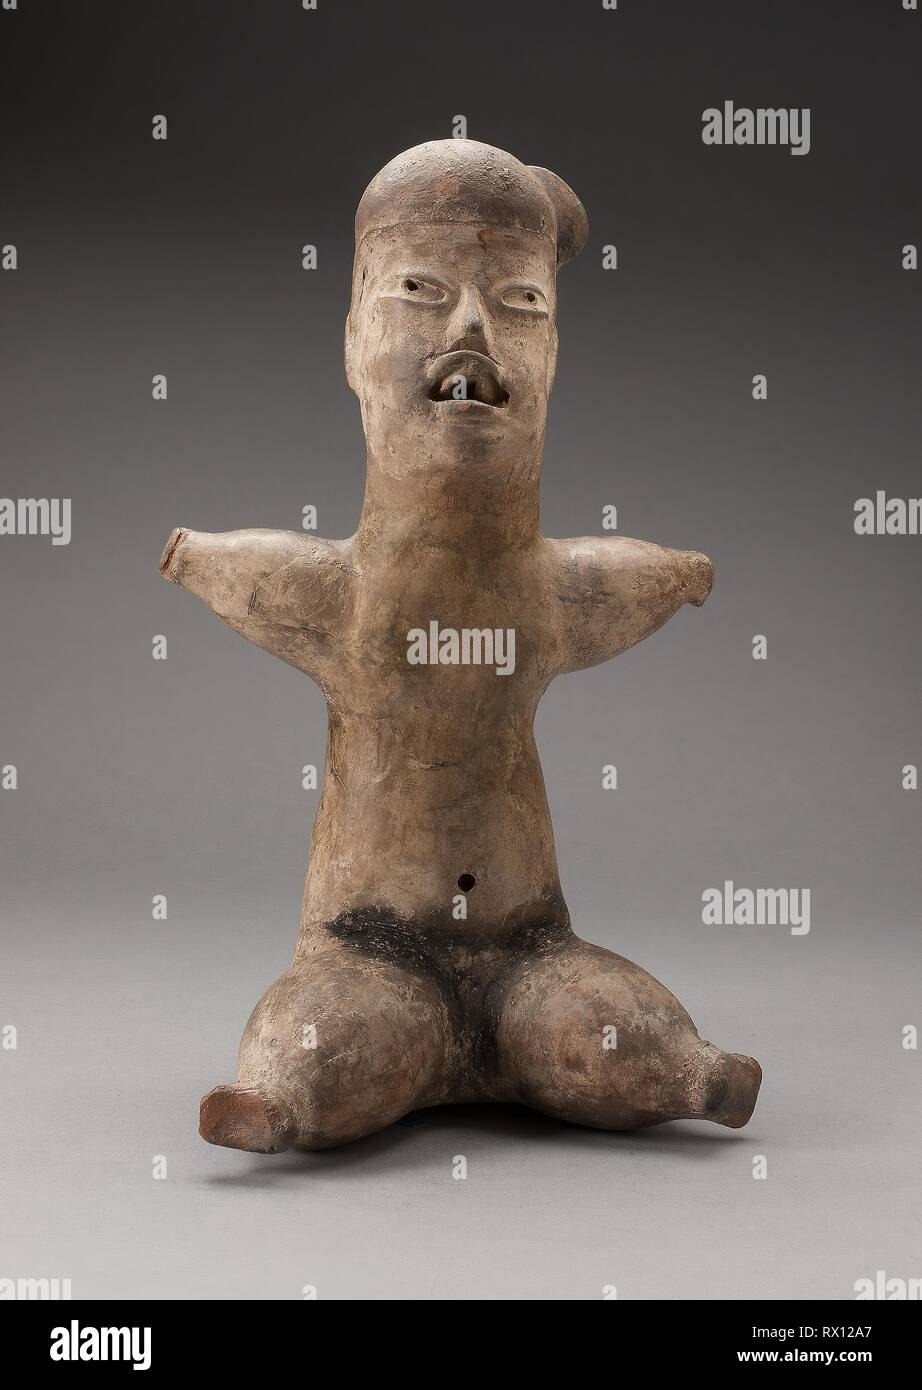 Seated Figurine. Tlatilco, Preclassic period; Tlapacoya, Valley of Mexico, Mexico. Date: 550 BC-450 BC. Dimensions: H. 8.9 cm (3 1/2 in.). Ceramic. Origin: Tlapacoyan. Museum: The Chicago Art Institute. Stock Photo